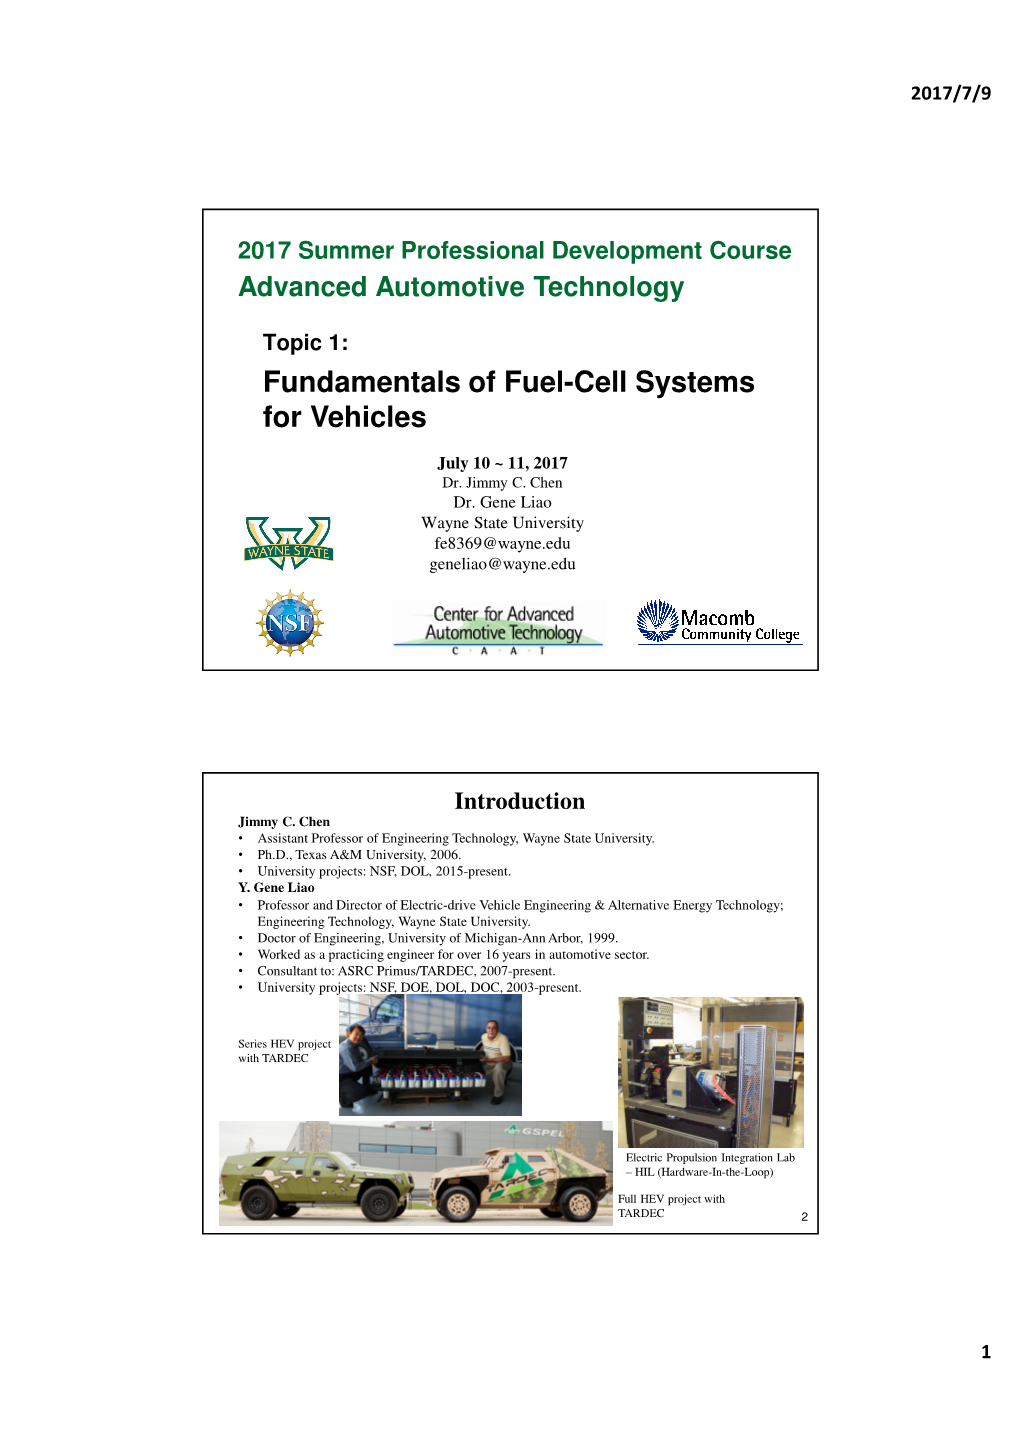 Fundamentals of Fuel-Cell Systems for Vehicles